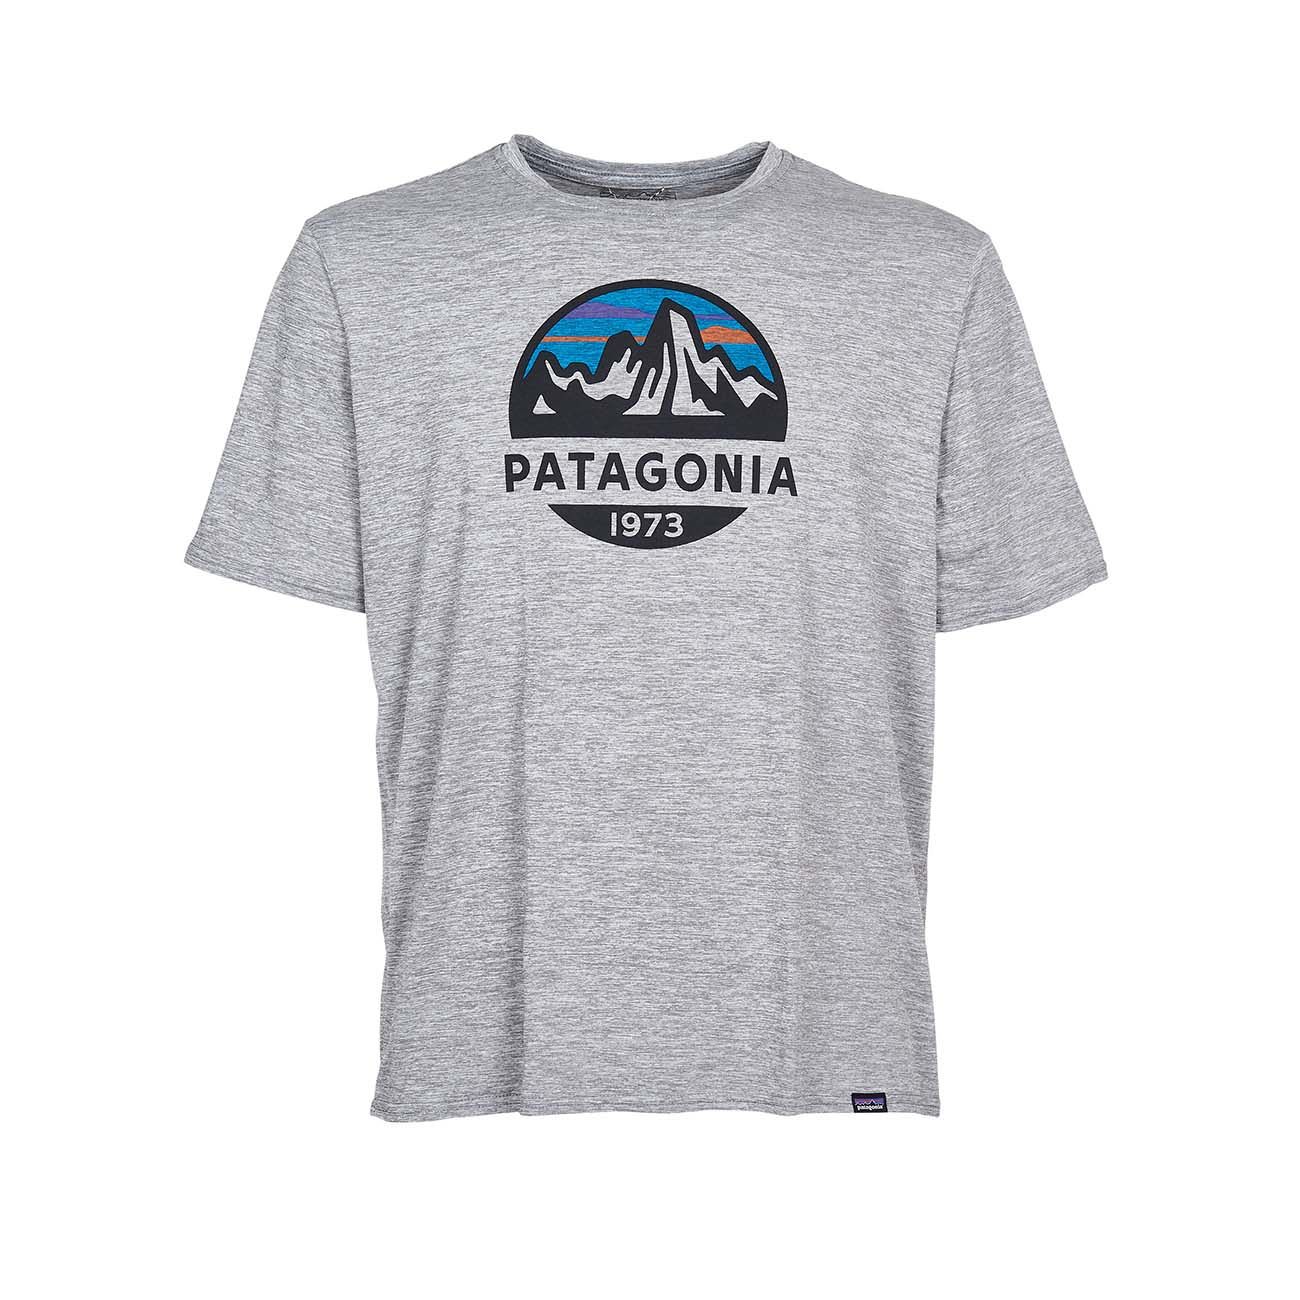 Dripping Skynd dig Parlament PATAGONIA COOL DAILY GRAPHIC T-SHIRT Man Fzse | Mascheroni Store